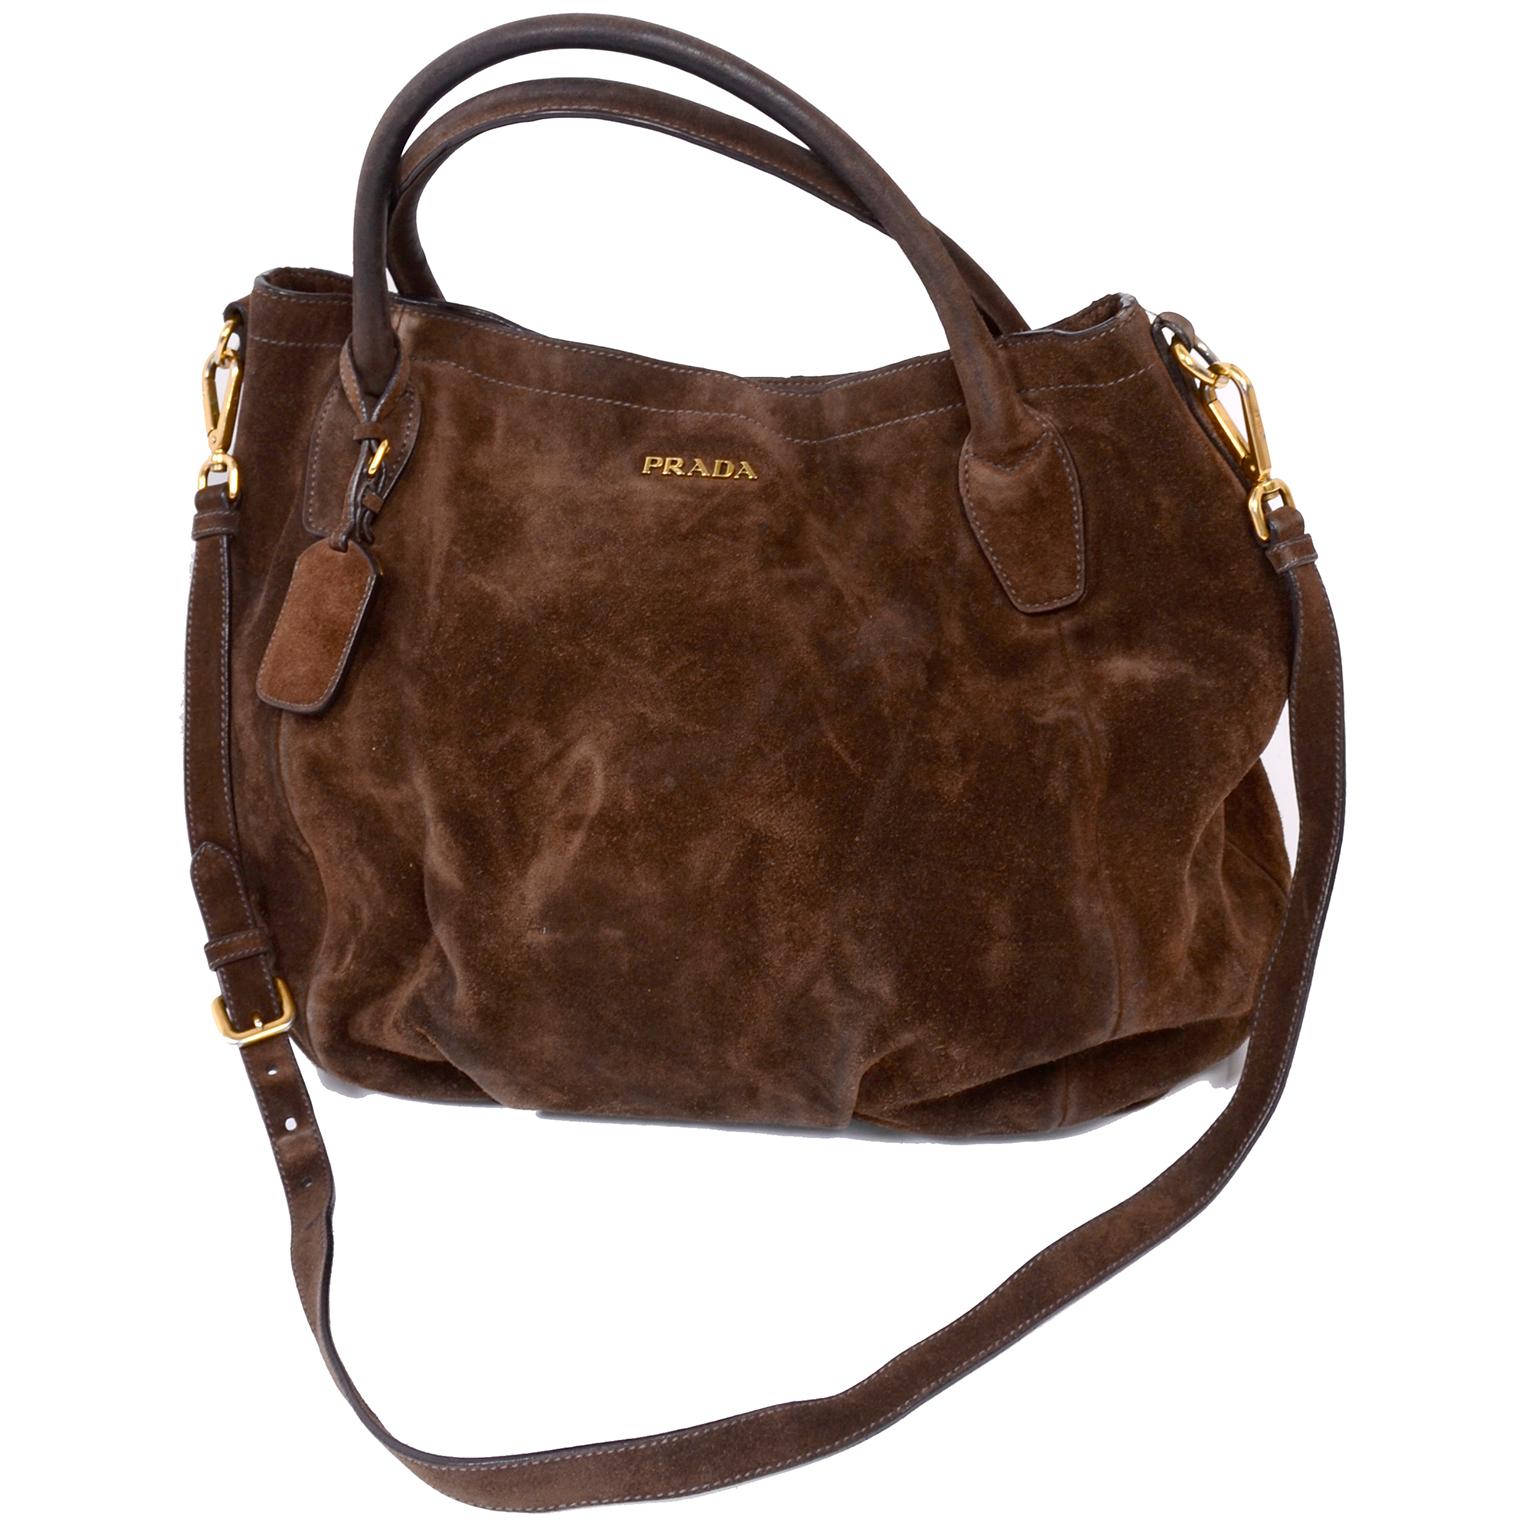 This is a large Prada brown suede slouchy shoulder bag with two top handles and a removable adjustable shoulder strap. All the gold hardware is marked 